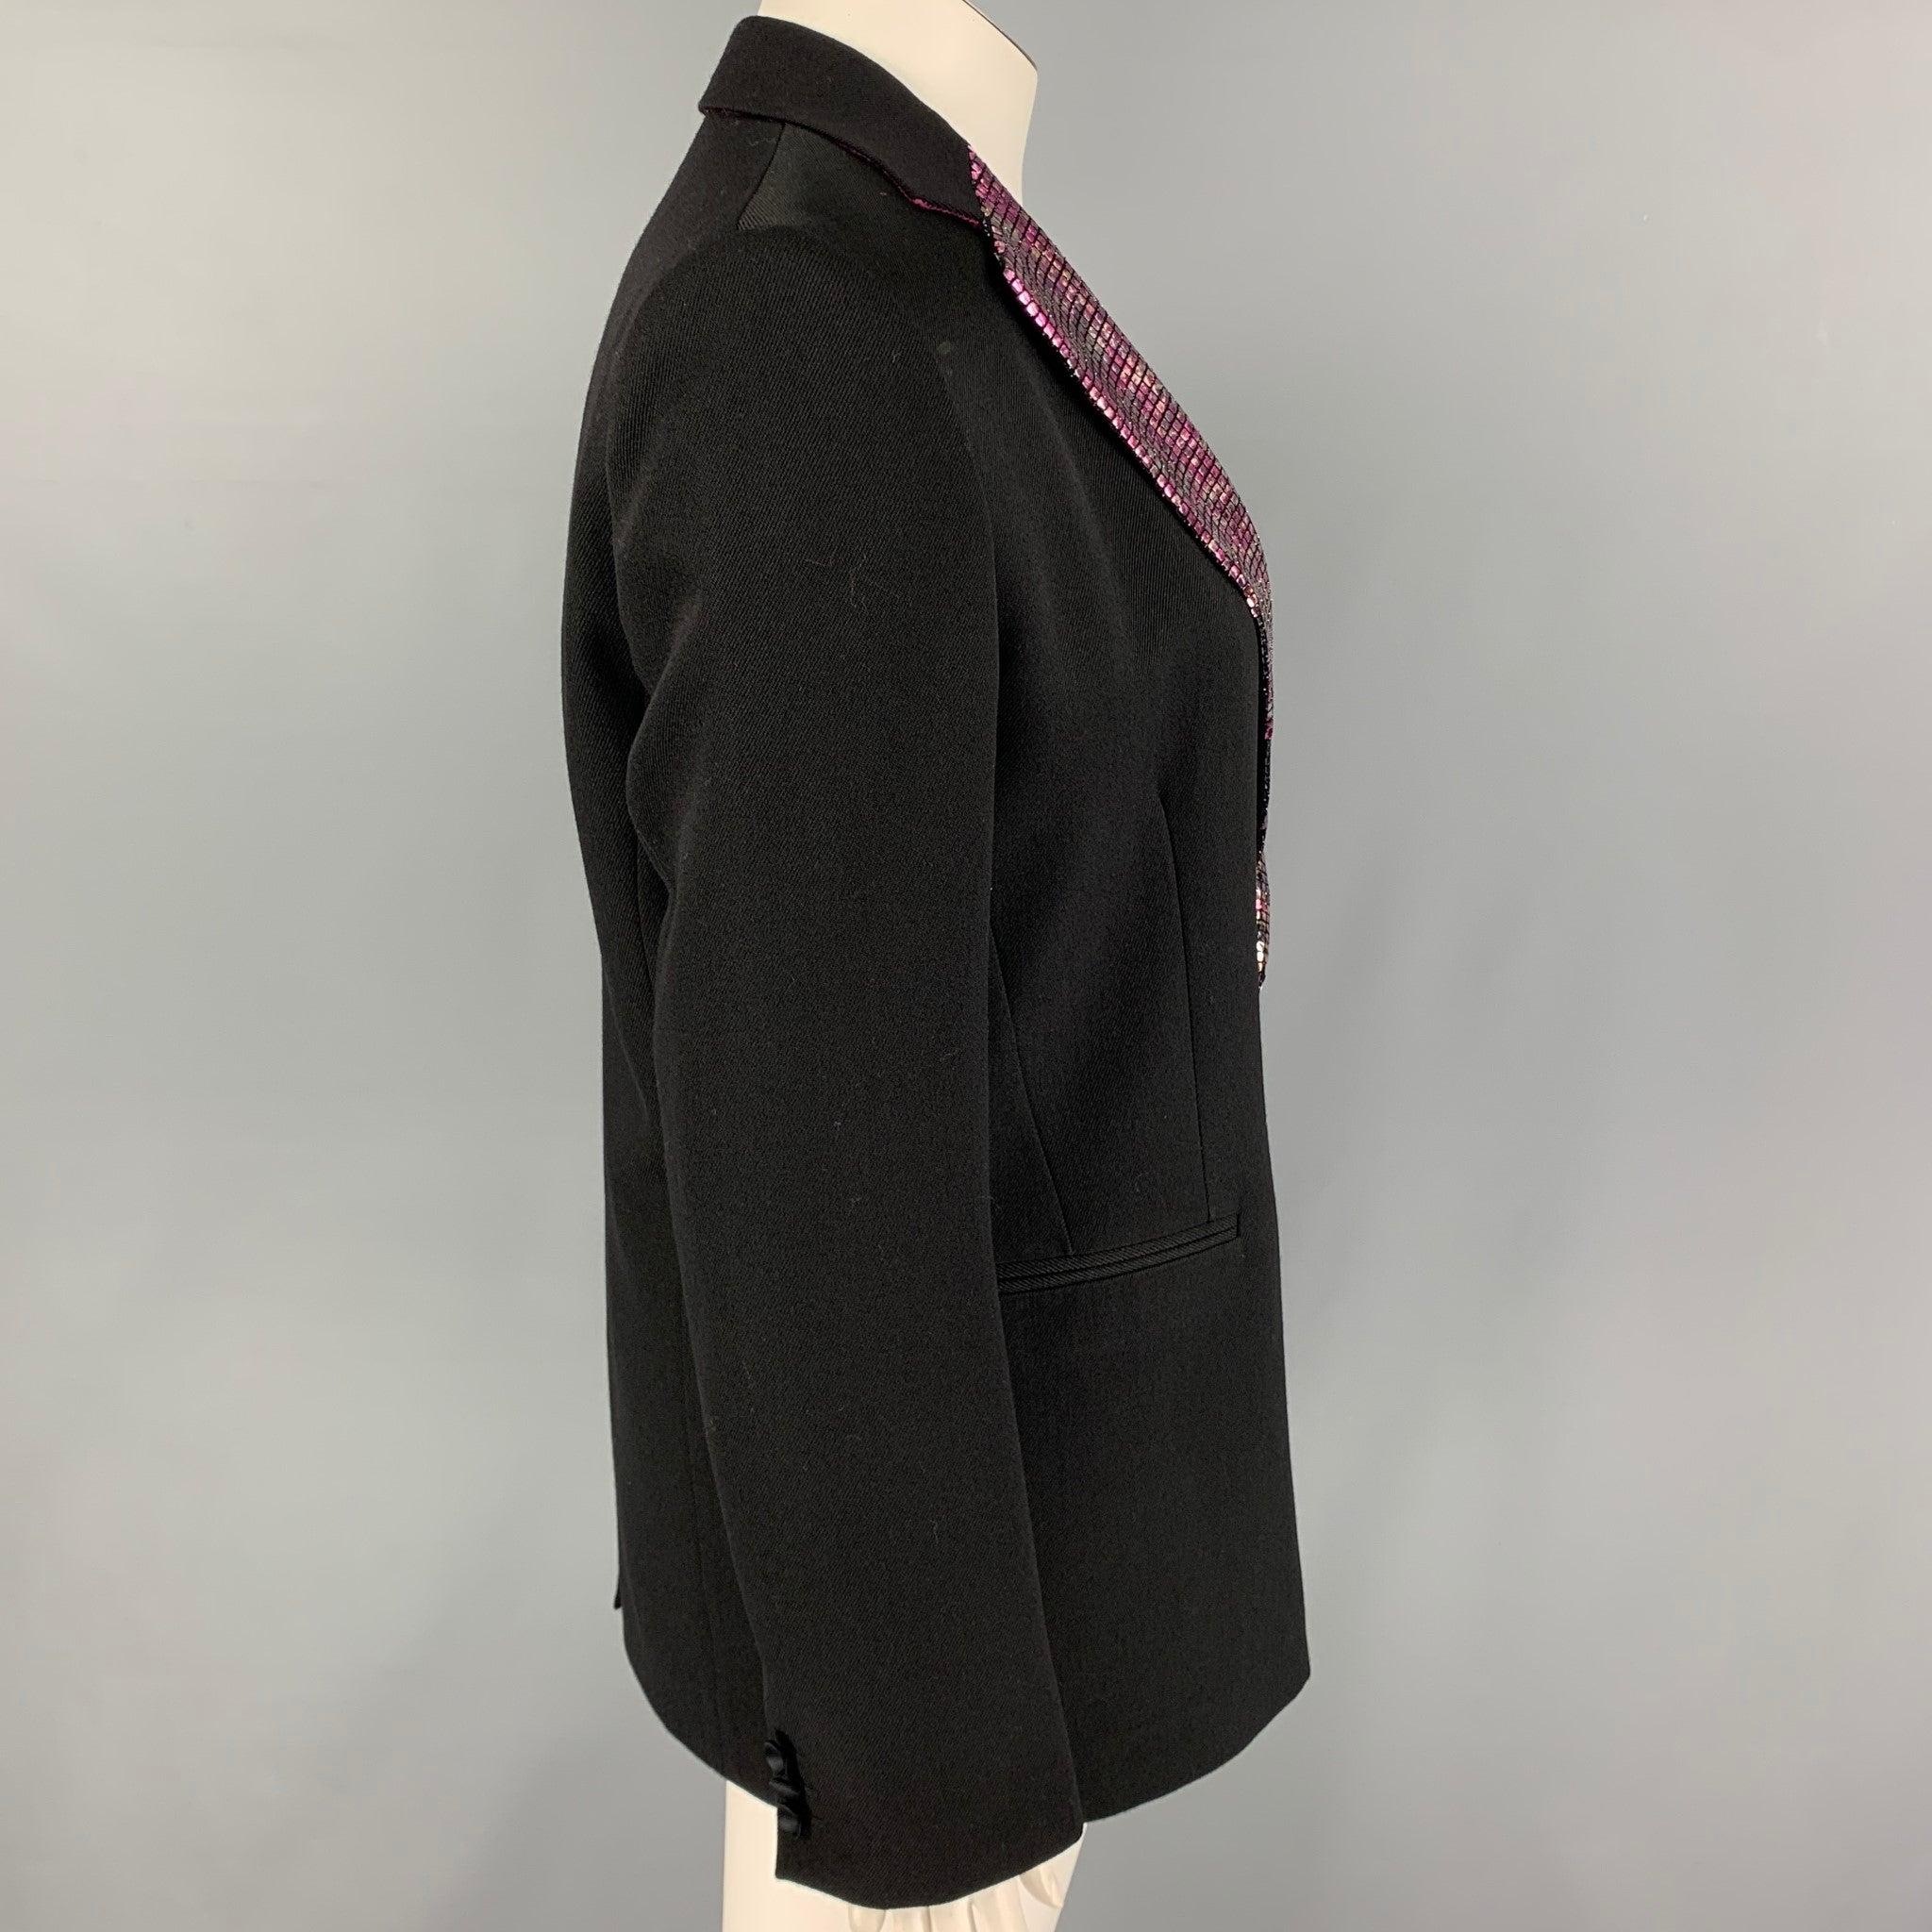 ETRO Size 36 Black Metallic Wool Notch Lapel Jacket In Good Condition For Sale In San Francisco, CA